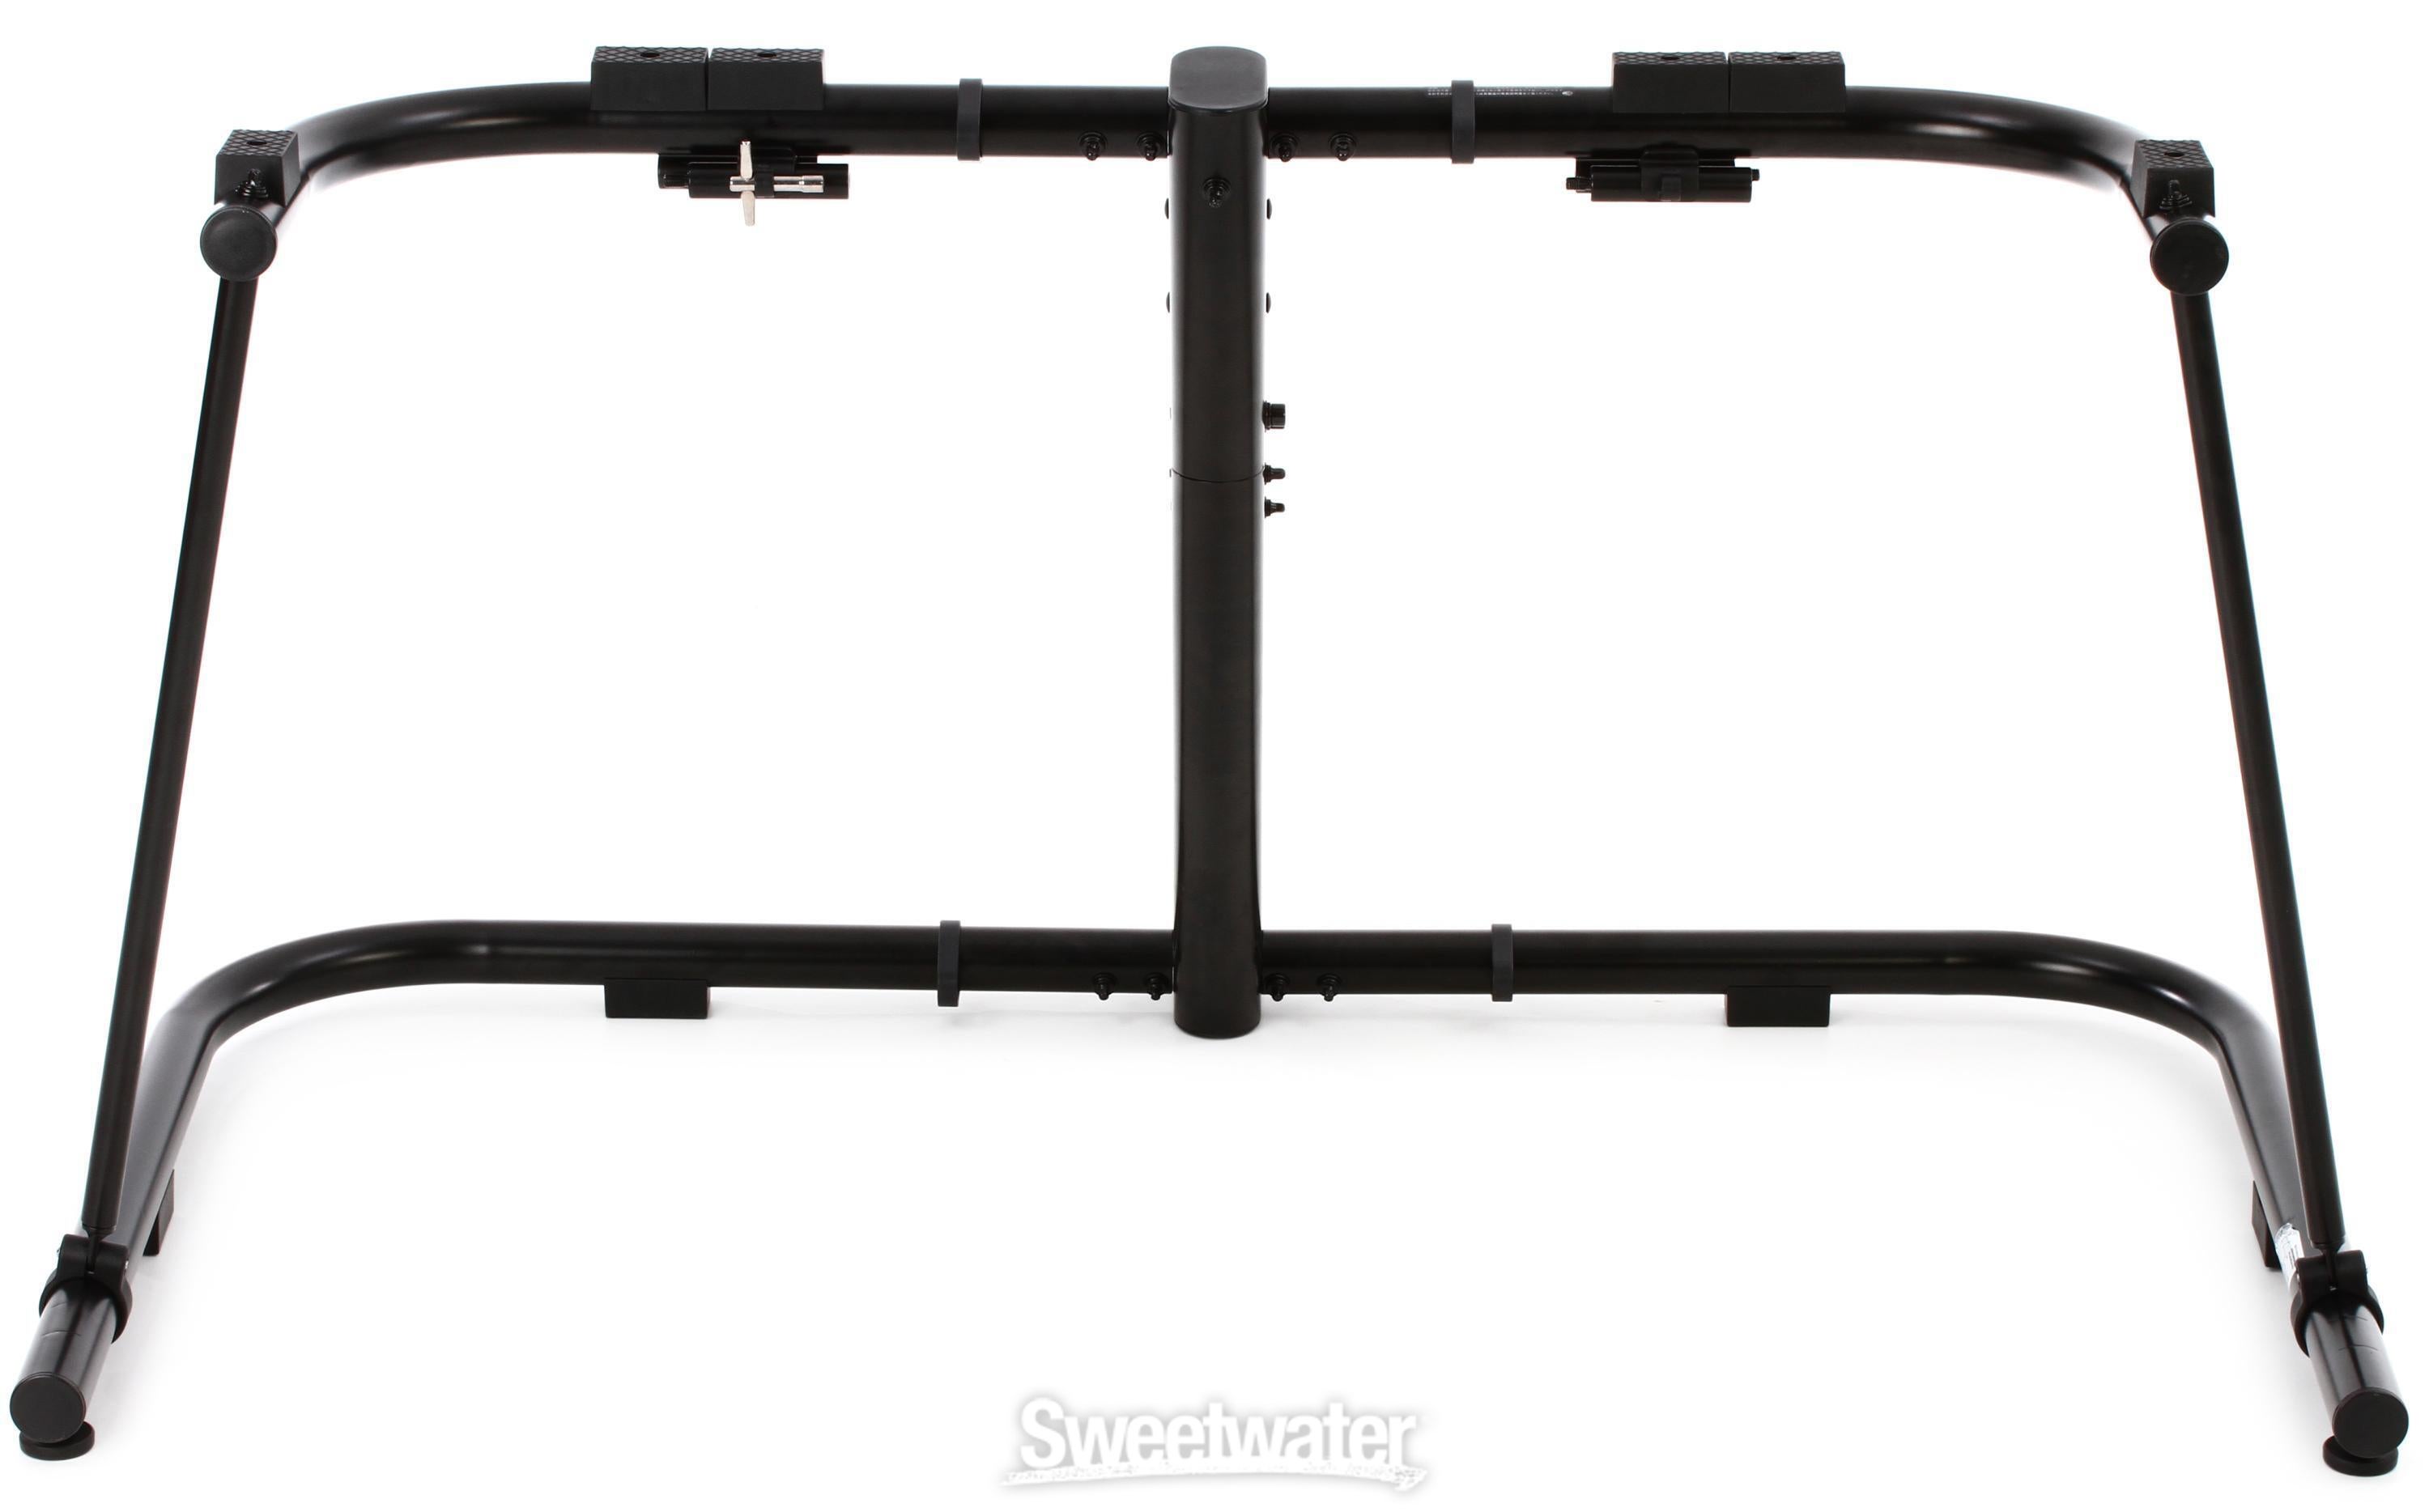 Roland KS-G8B Keyboard Stand | Sweetwater